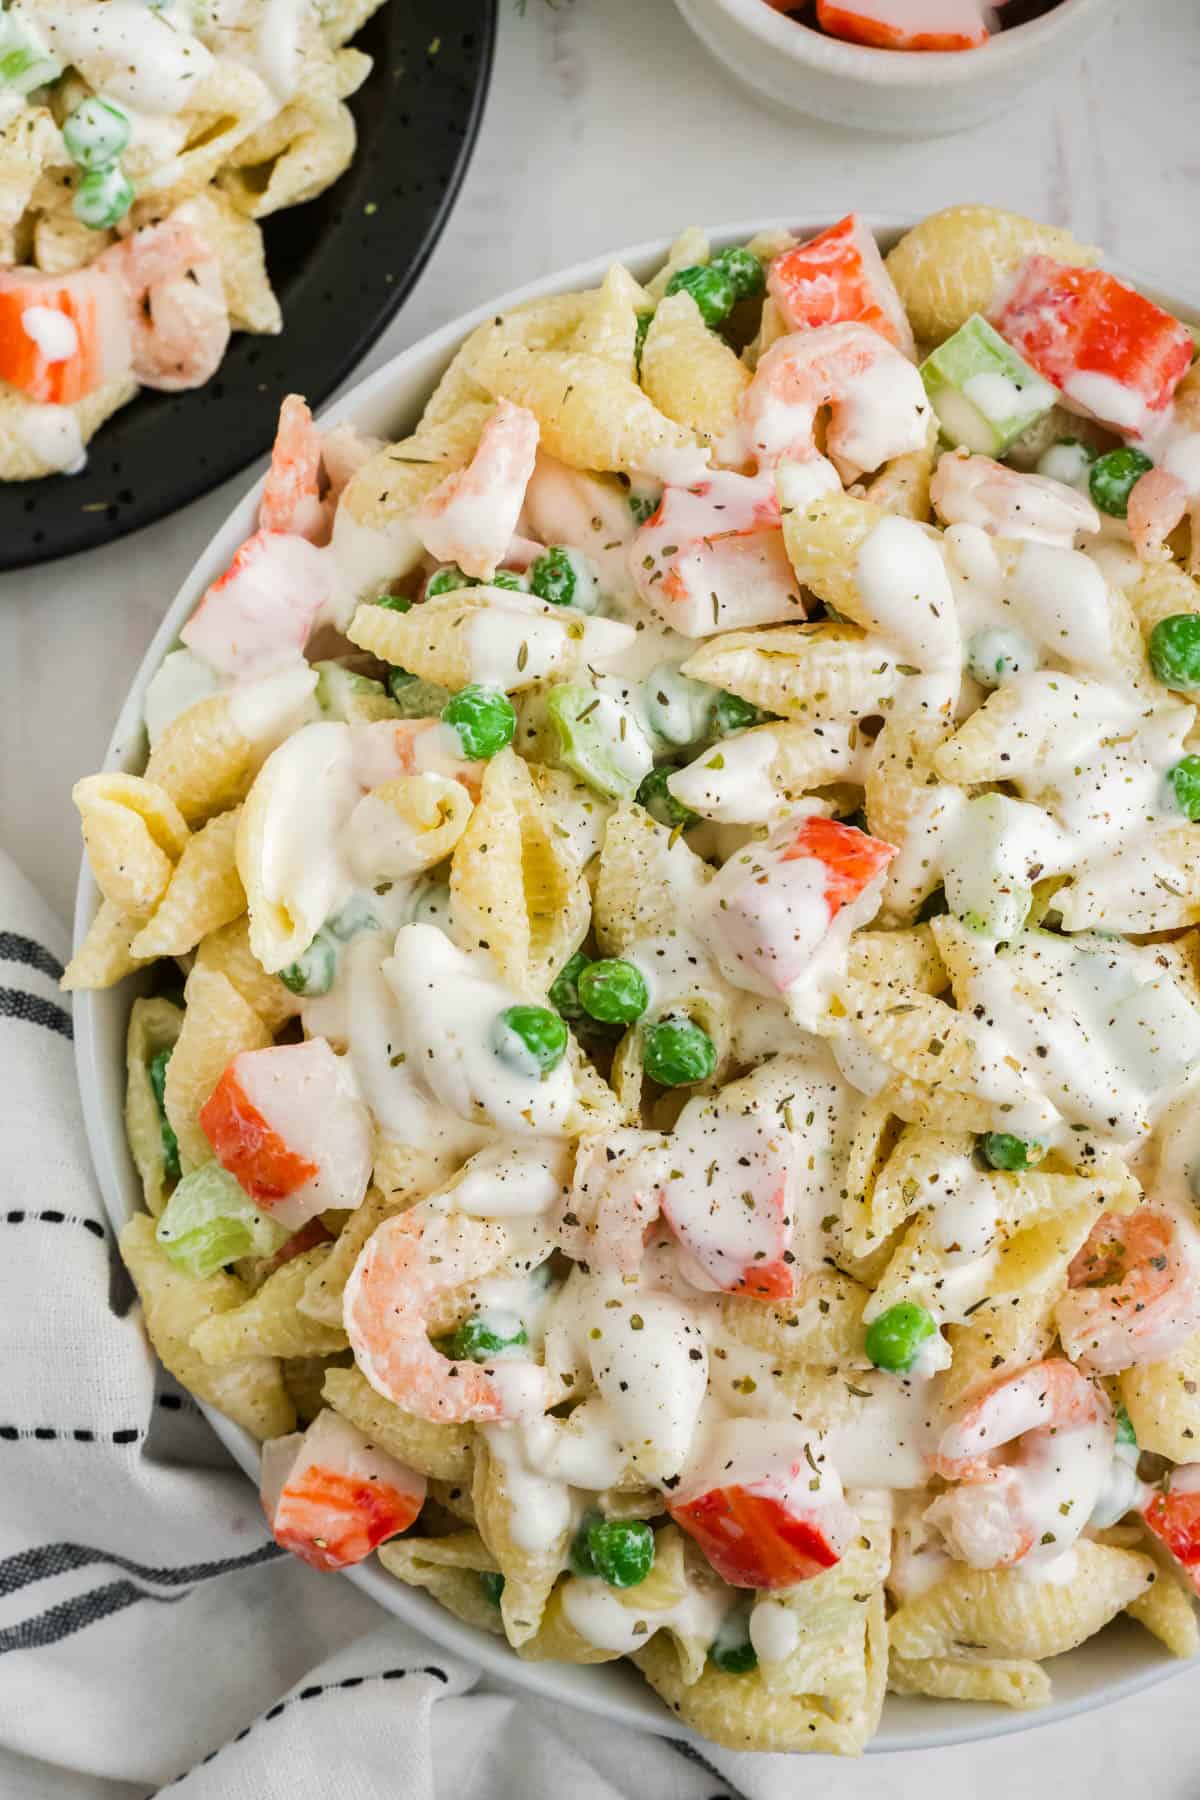 An overhead image of a bowl of shell pasta salad with seafood in a creamy dressing.